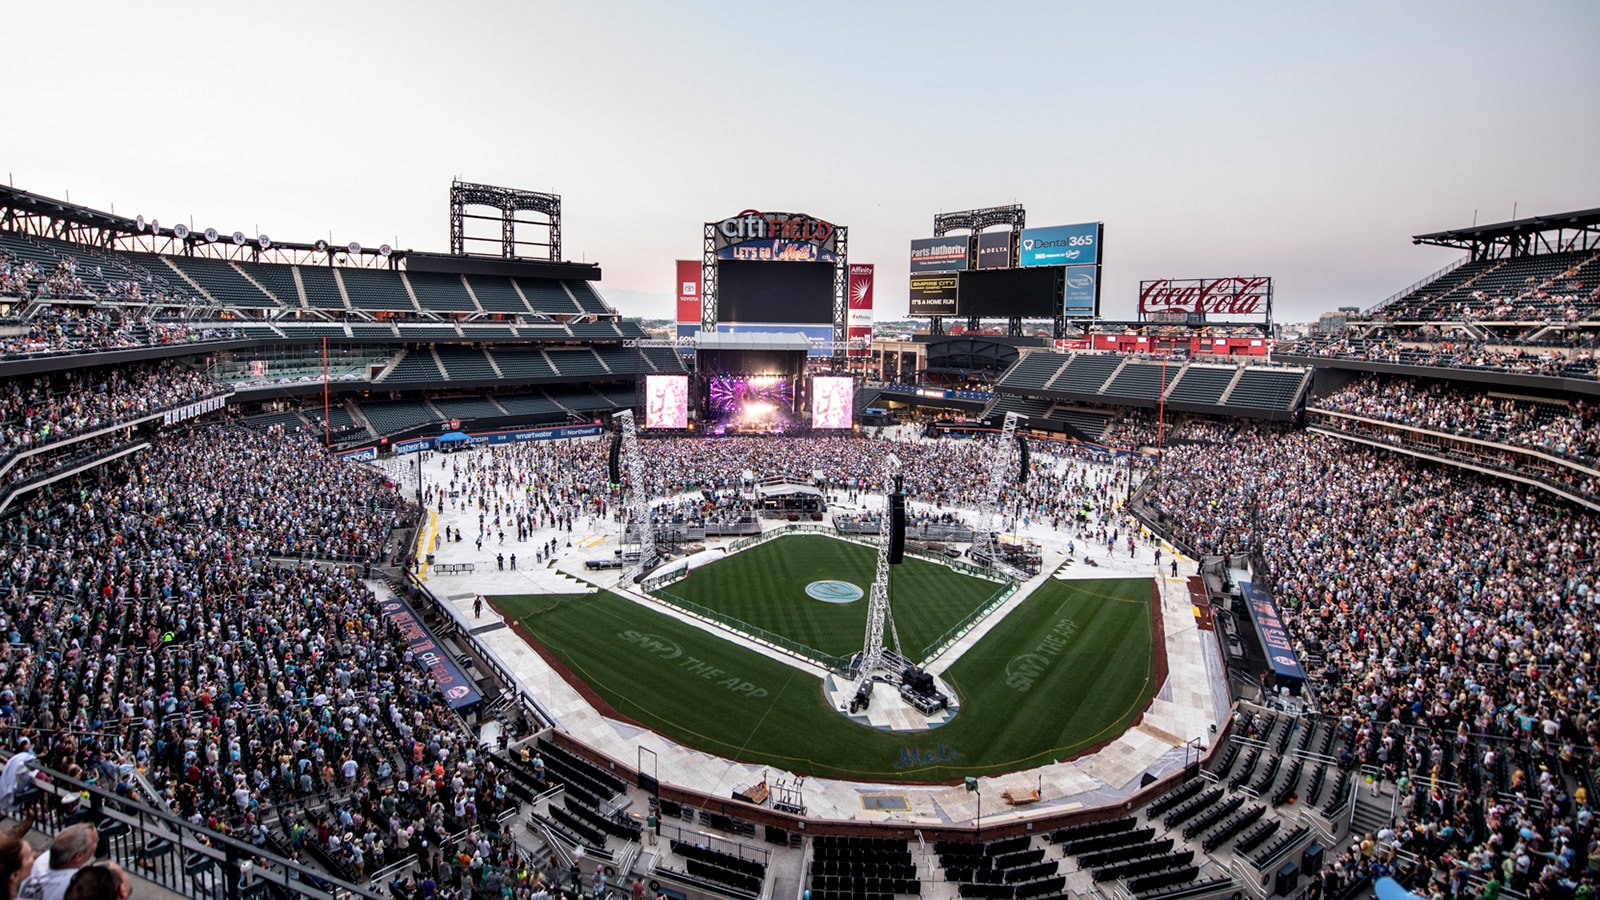 Additional PANTHER loudspeakers were deployed for stadium delay towers in Philadelphia and at the final weekend in NYC at Citi Field as provided by DBS Audio.